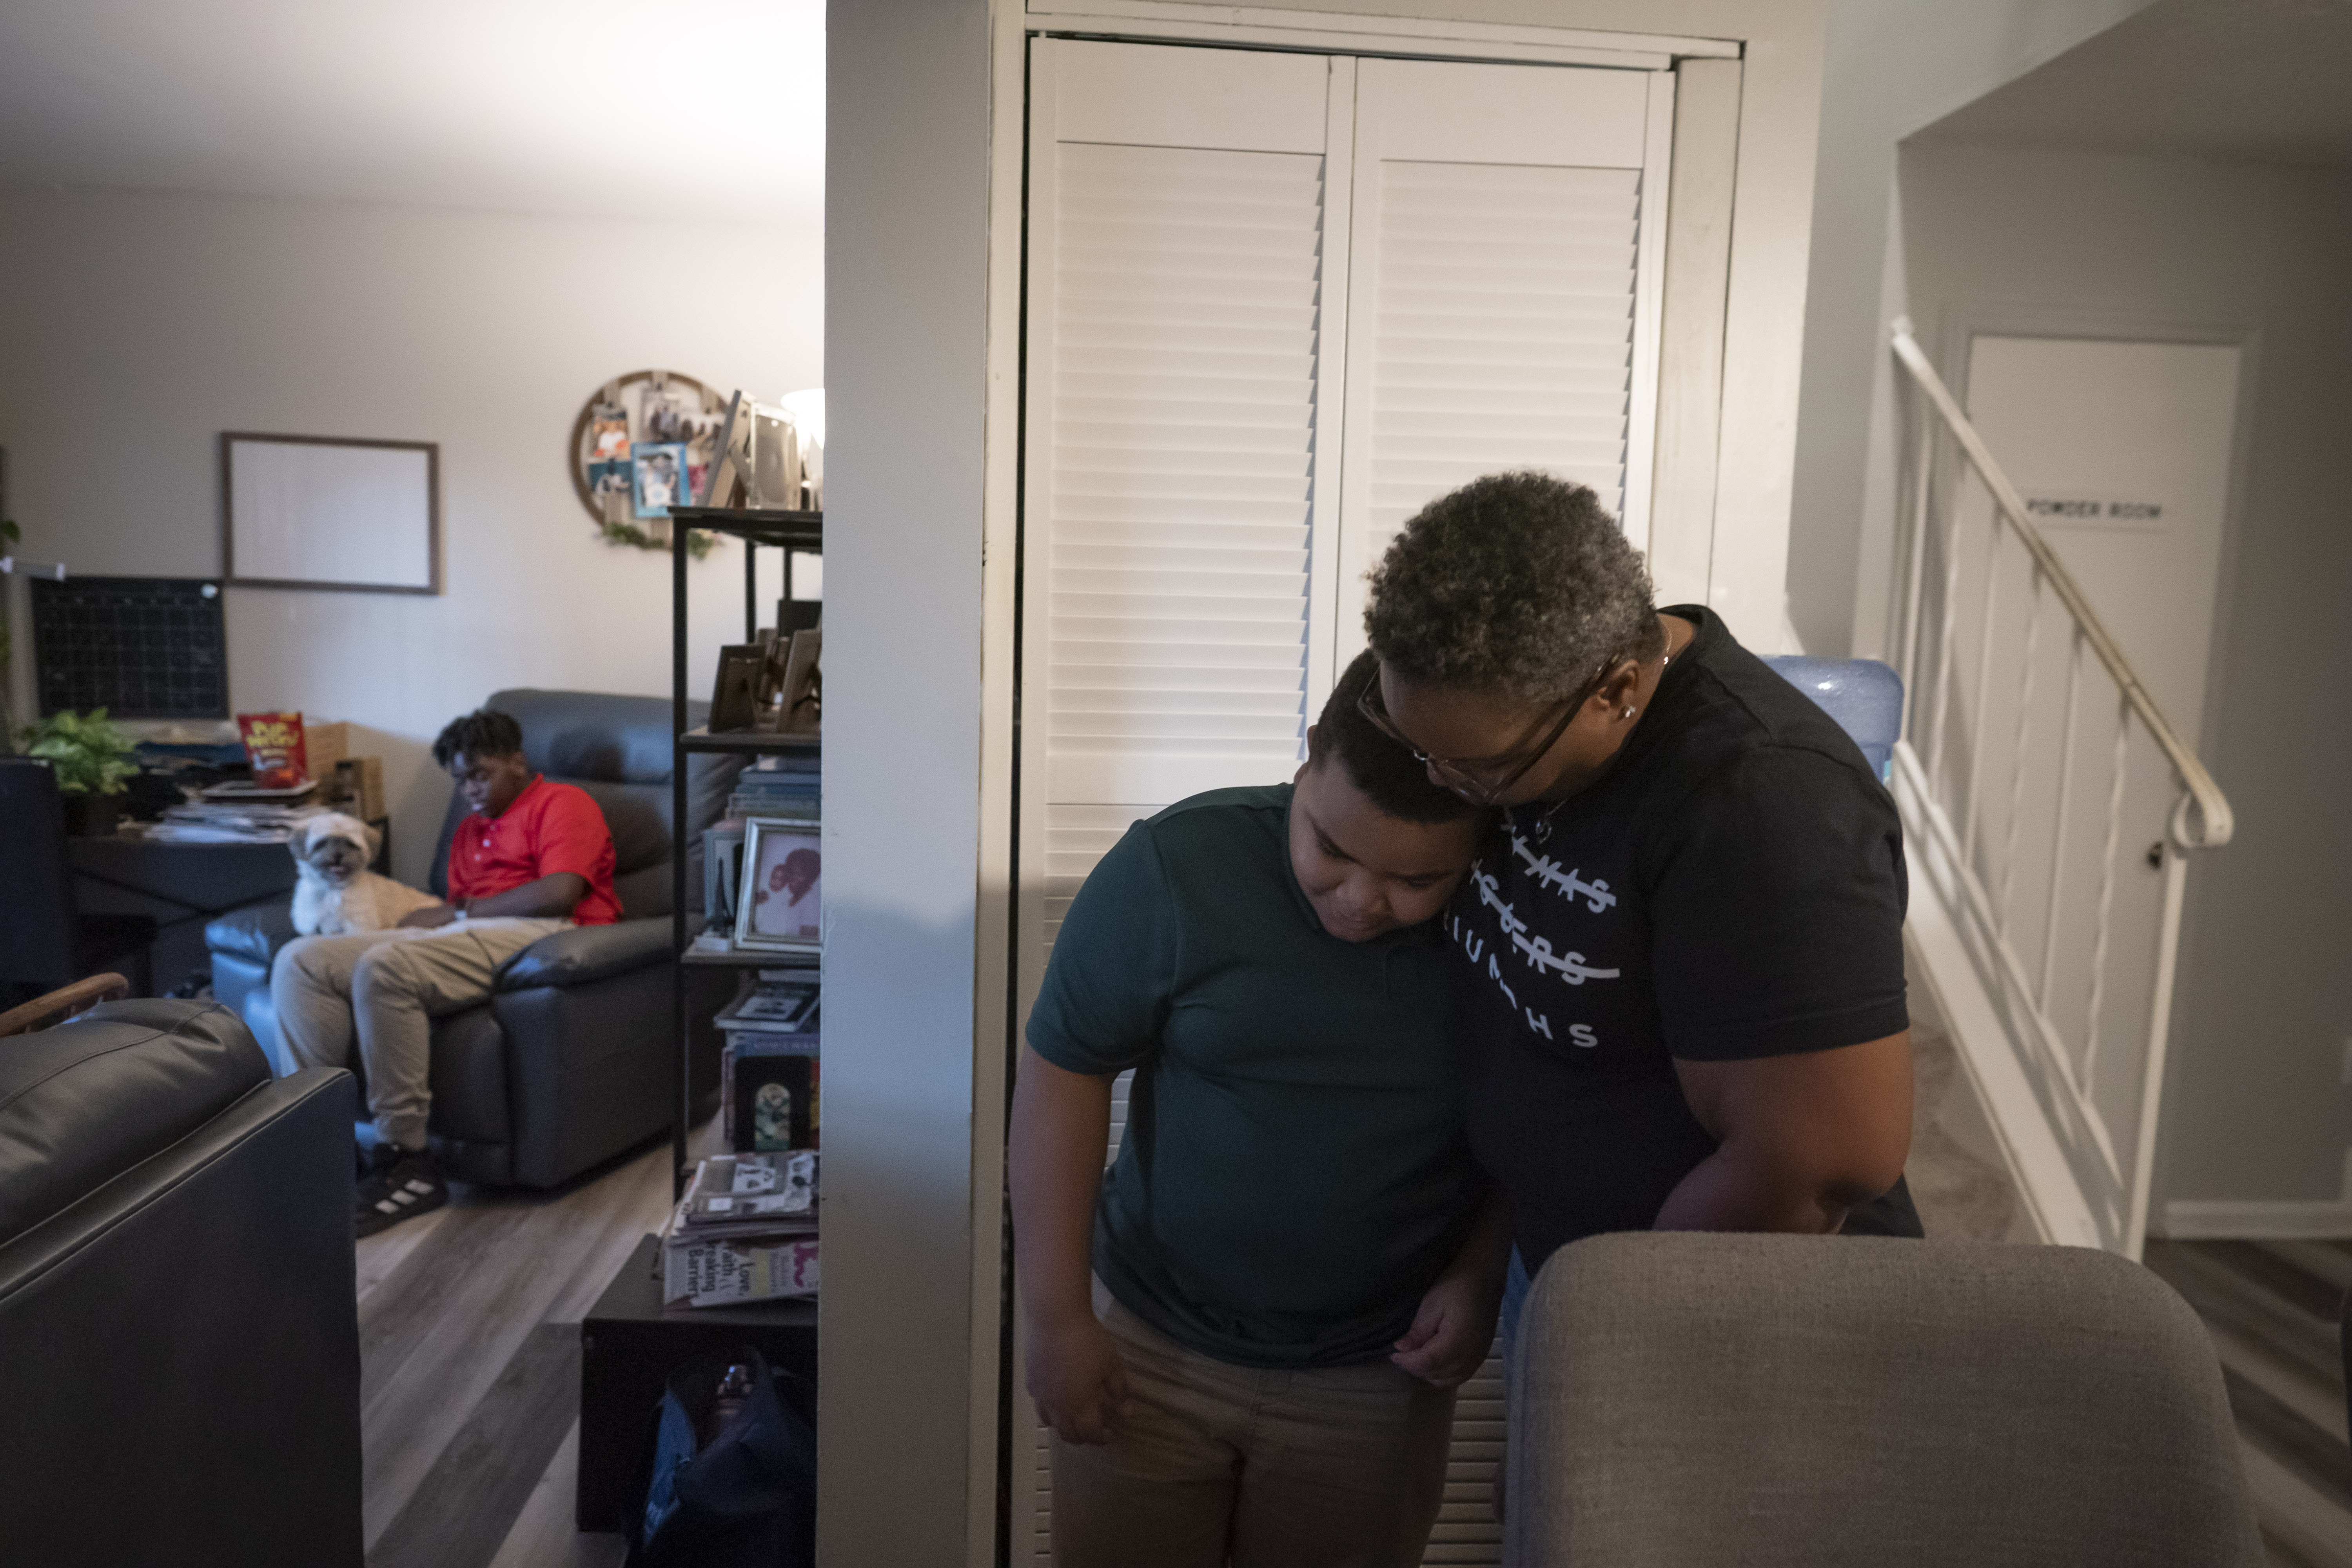 Melanese Marr-Thomas hugs her youngest child, Savion Thomas, while her other son, Zachary Marr, shares a seat with their pet dog, Ryder, in their living room in District Heights, Md., on Wednesday, Sept. 21, 2022. 